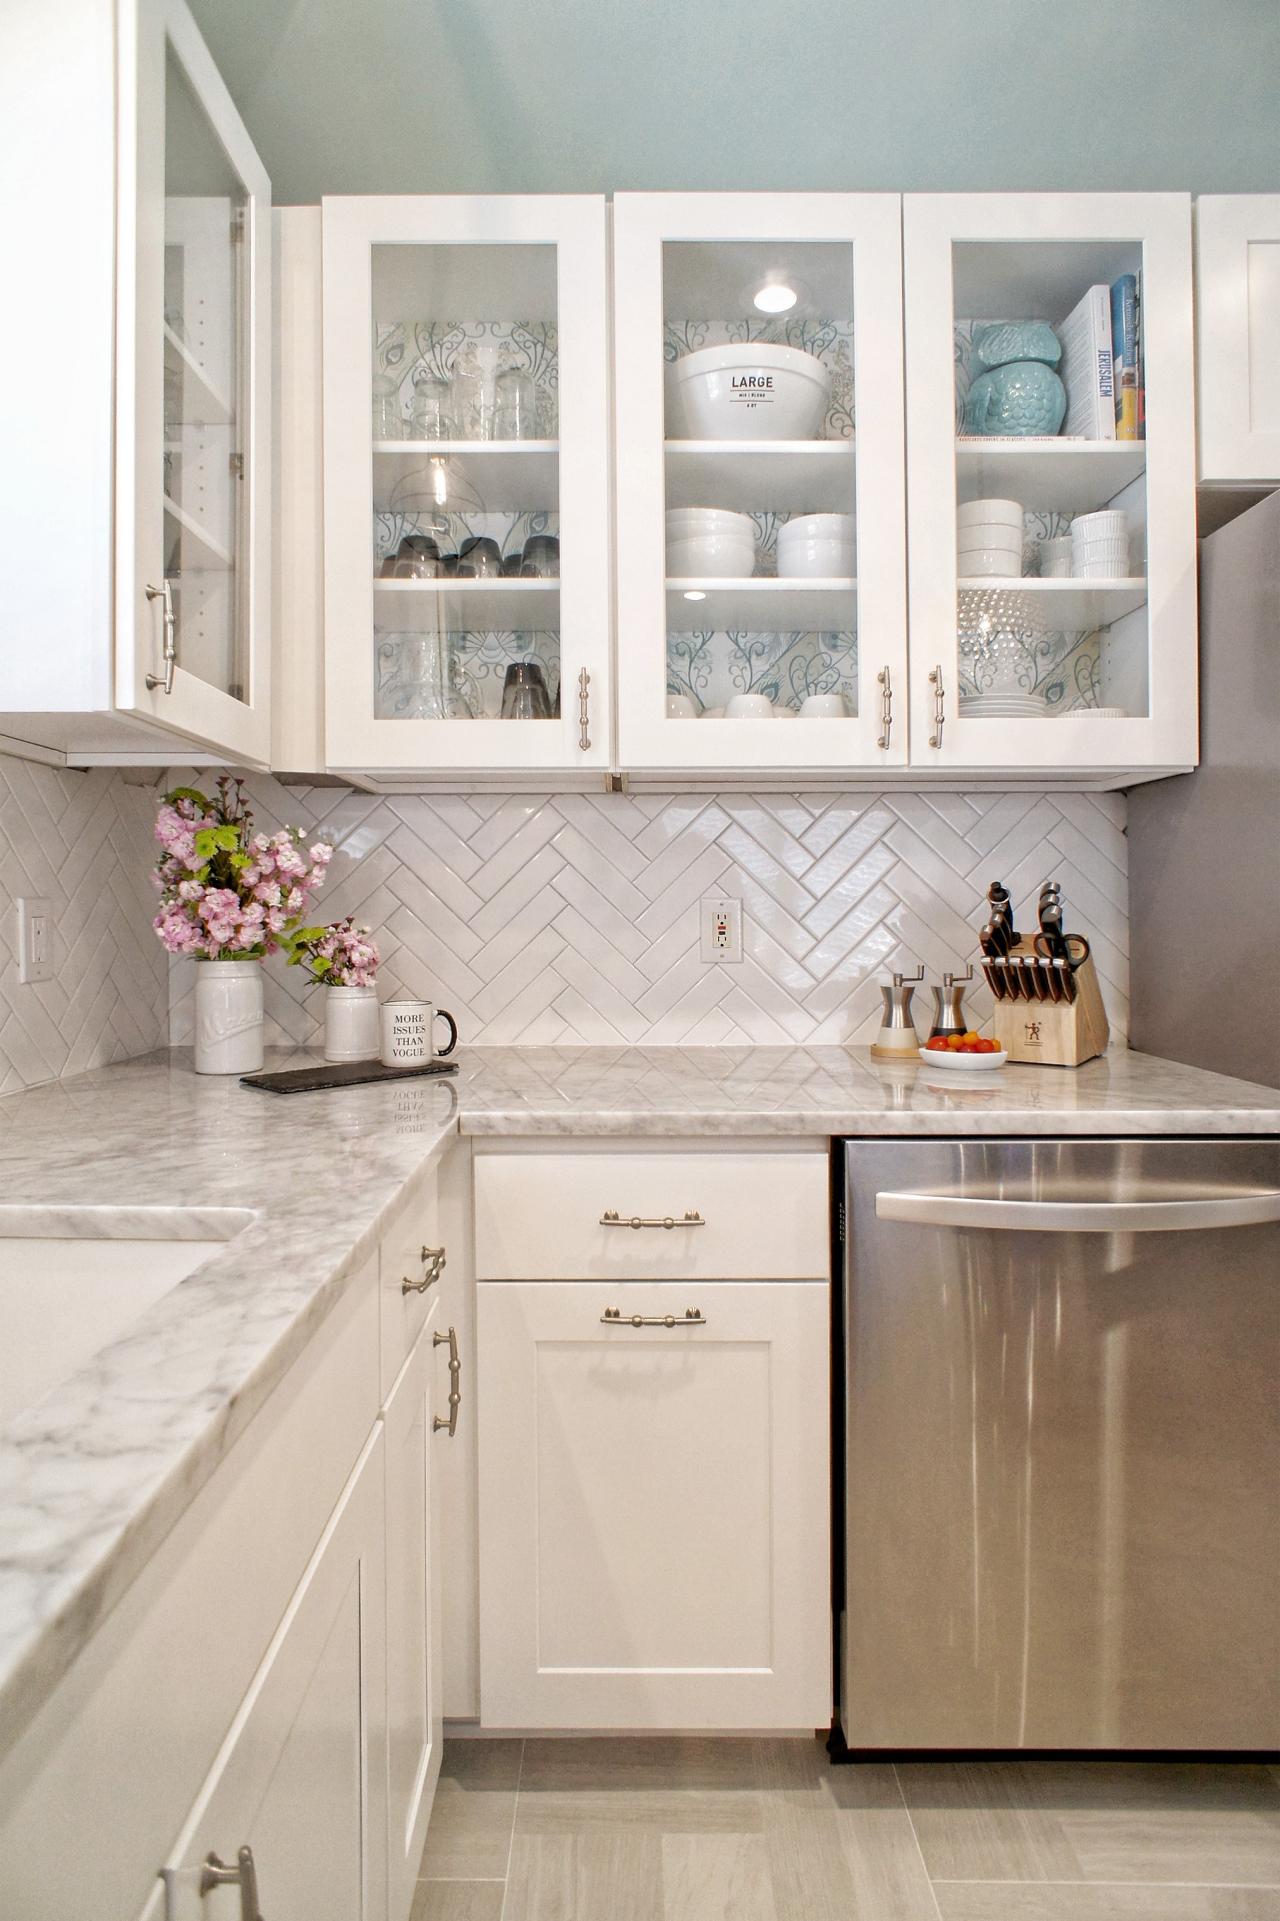 The History of Subway Tile + Our Favorite Ways to Use It  HGTVs Decorating  Design Blog  HGTV